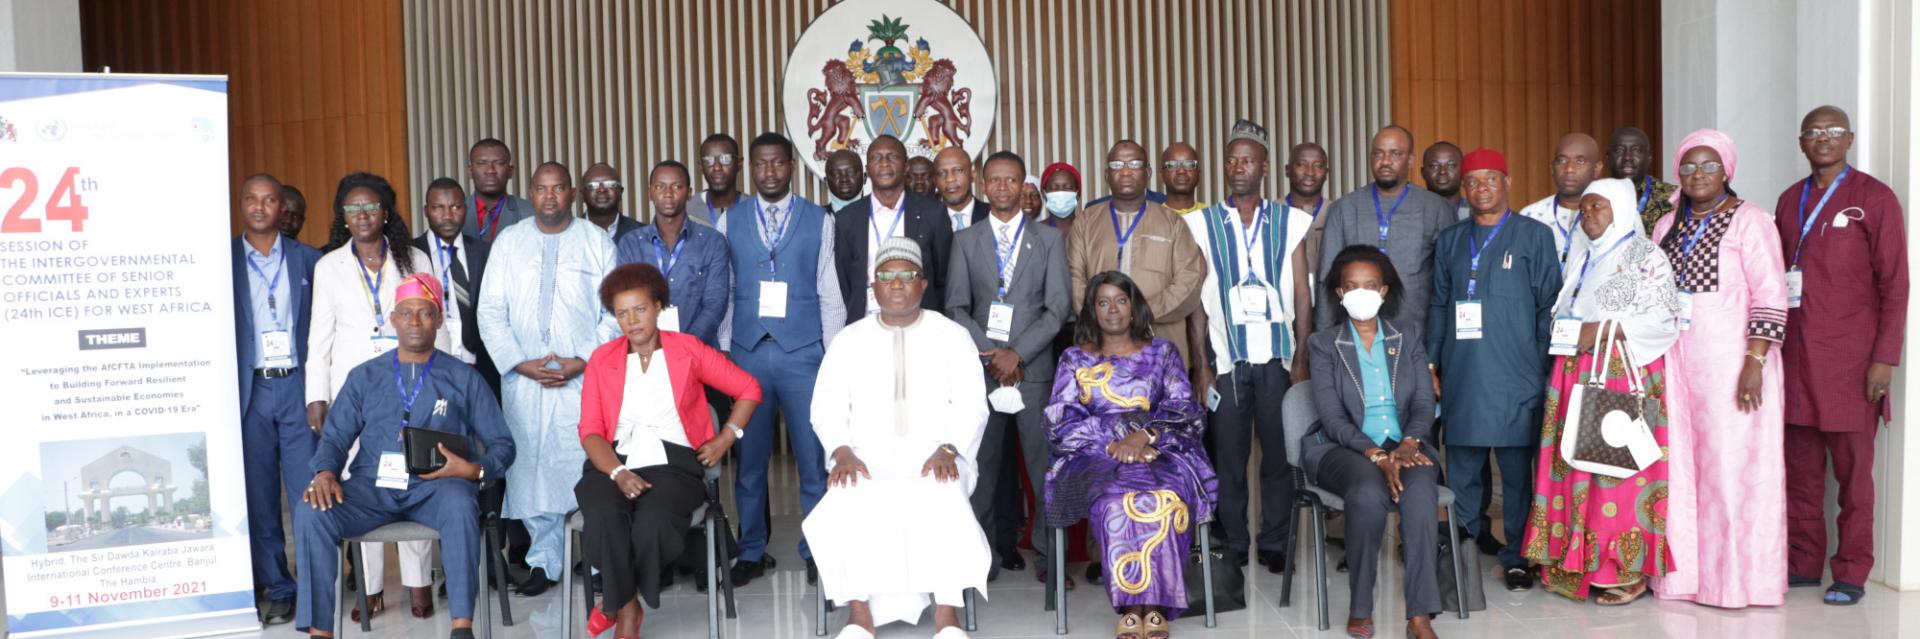 24th Session of the Intergovernmental Committee of Senior Officials and Experts for West Africa